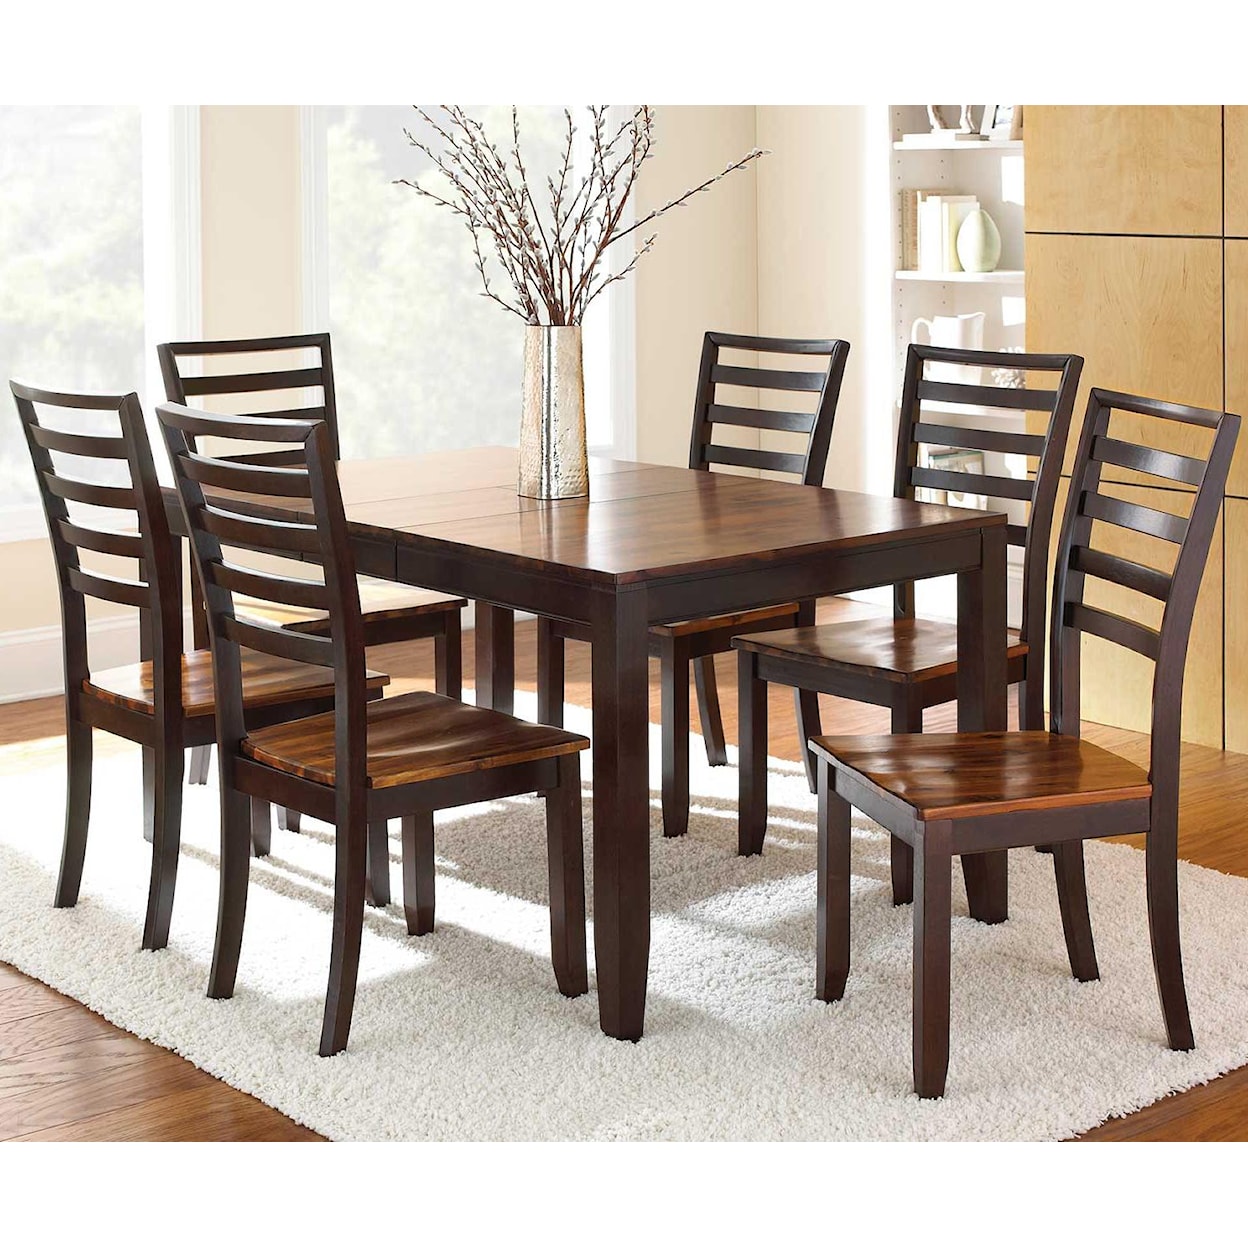 Steve Silver Abaco 7-Piece Dining Set